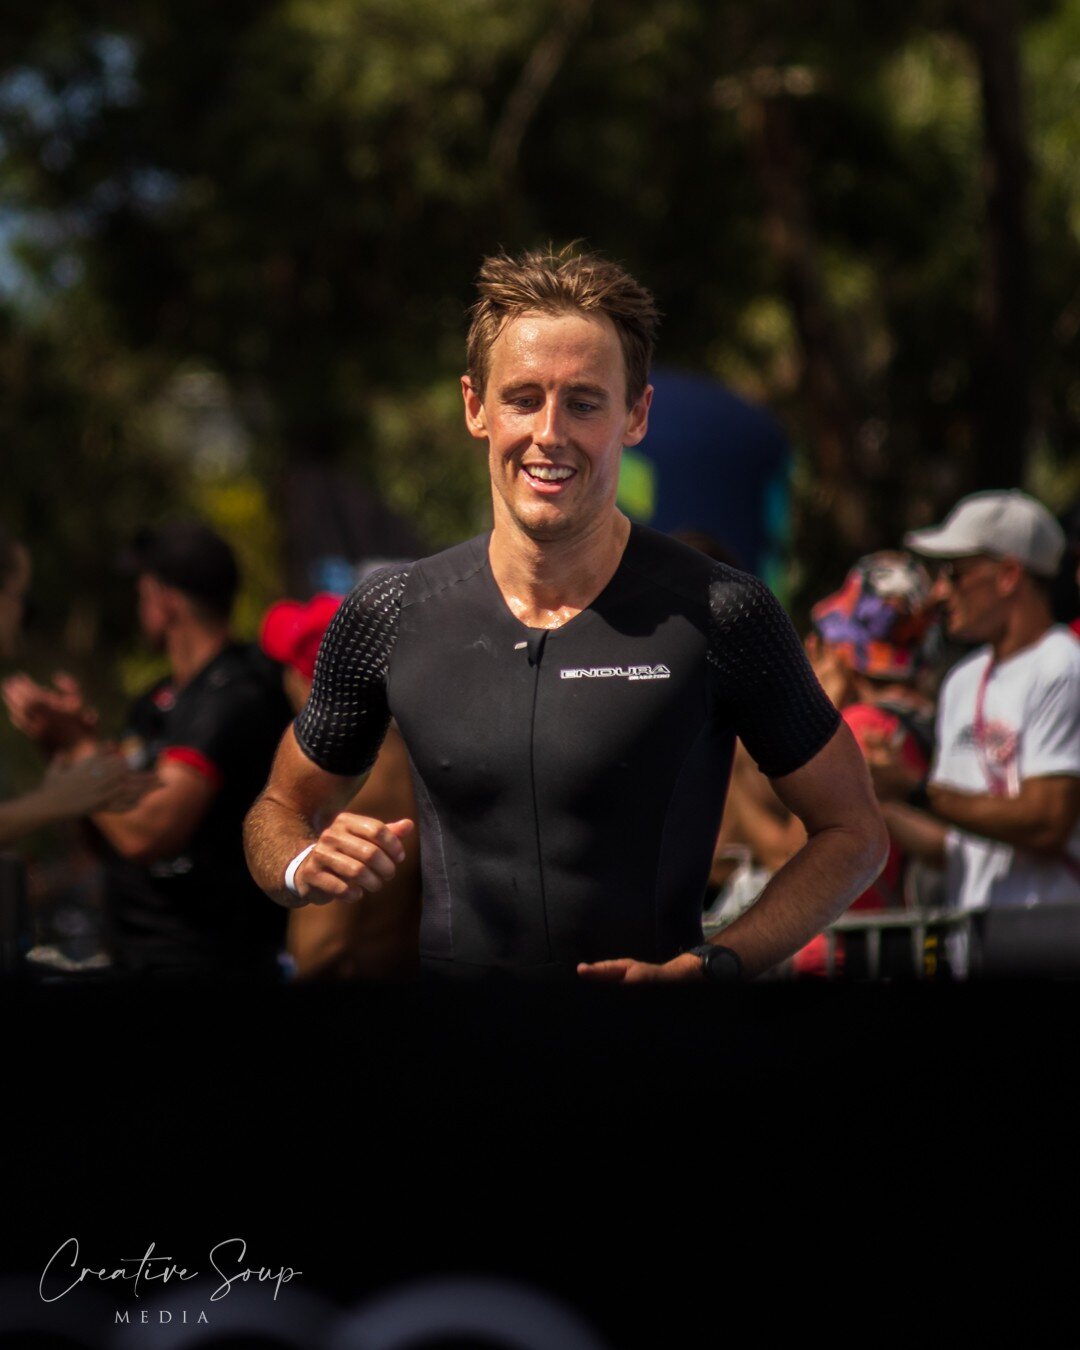 Simon Hearn // Huskisson, Jervis Bay NSW

Professional triathlete @simon_hearn taking out the top spot in the Ultimate mens category, claiming Australian Long Course title at the the Shimano Husky Triathlon Festival 2021. Following Simon in second pl